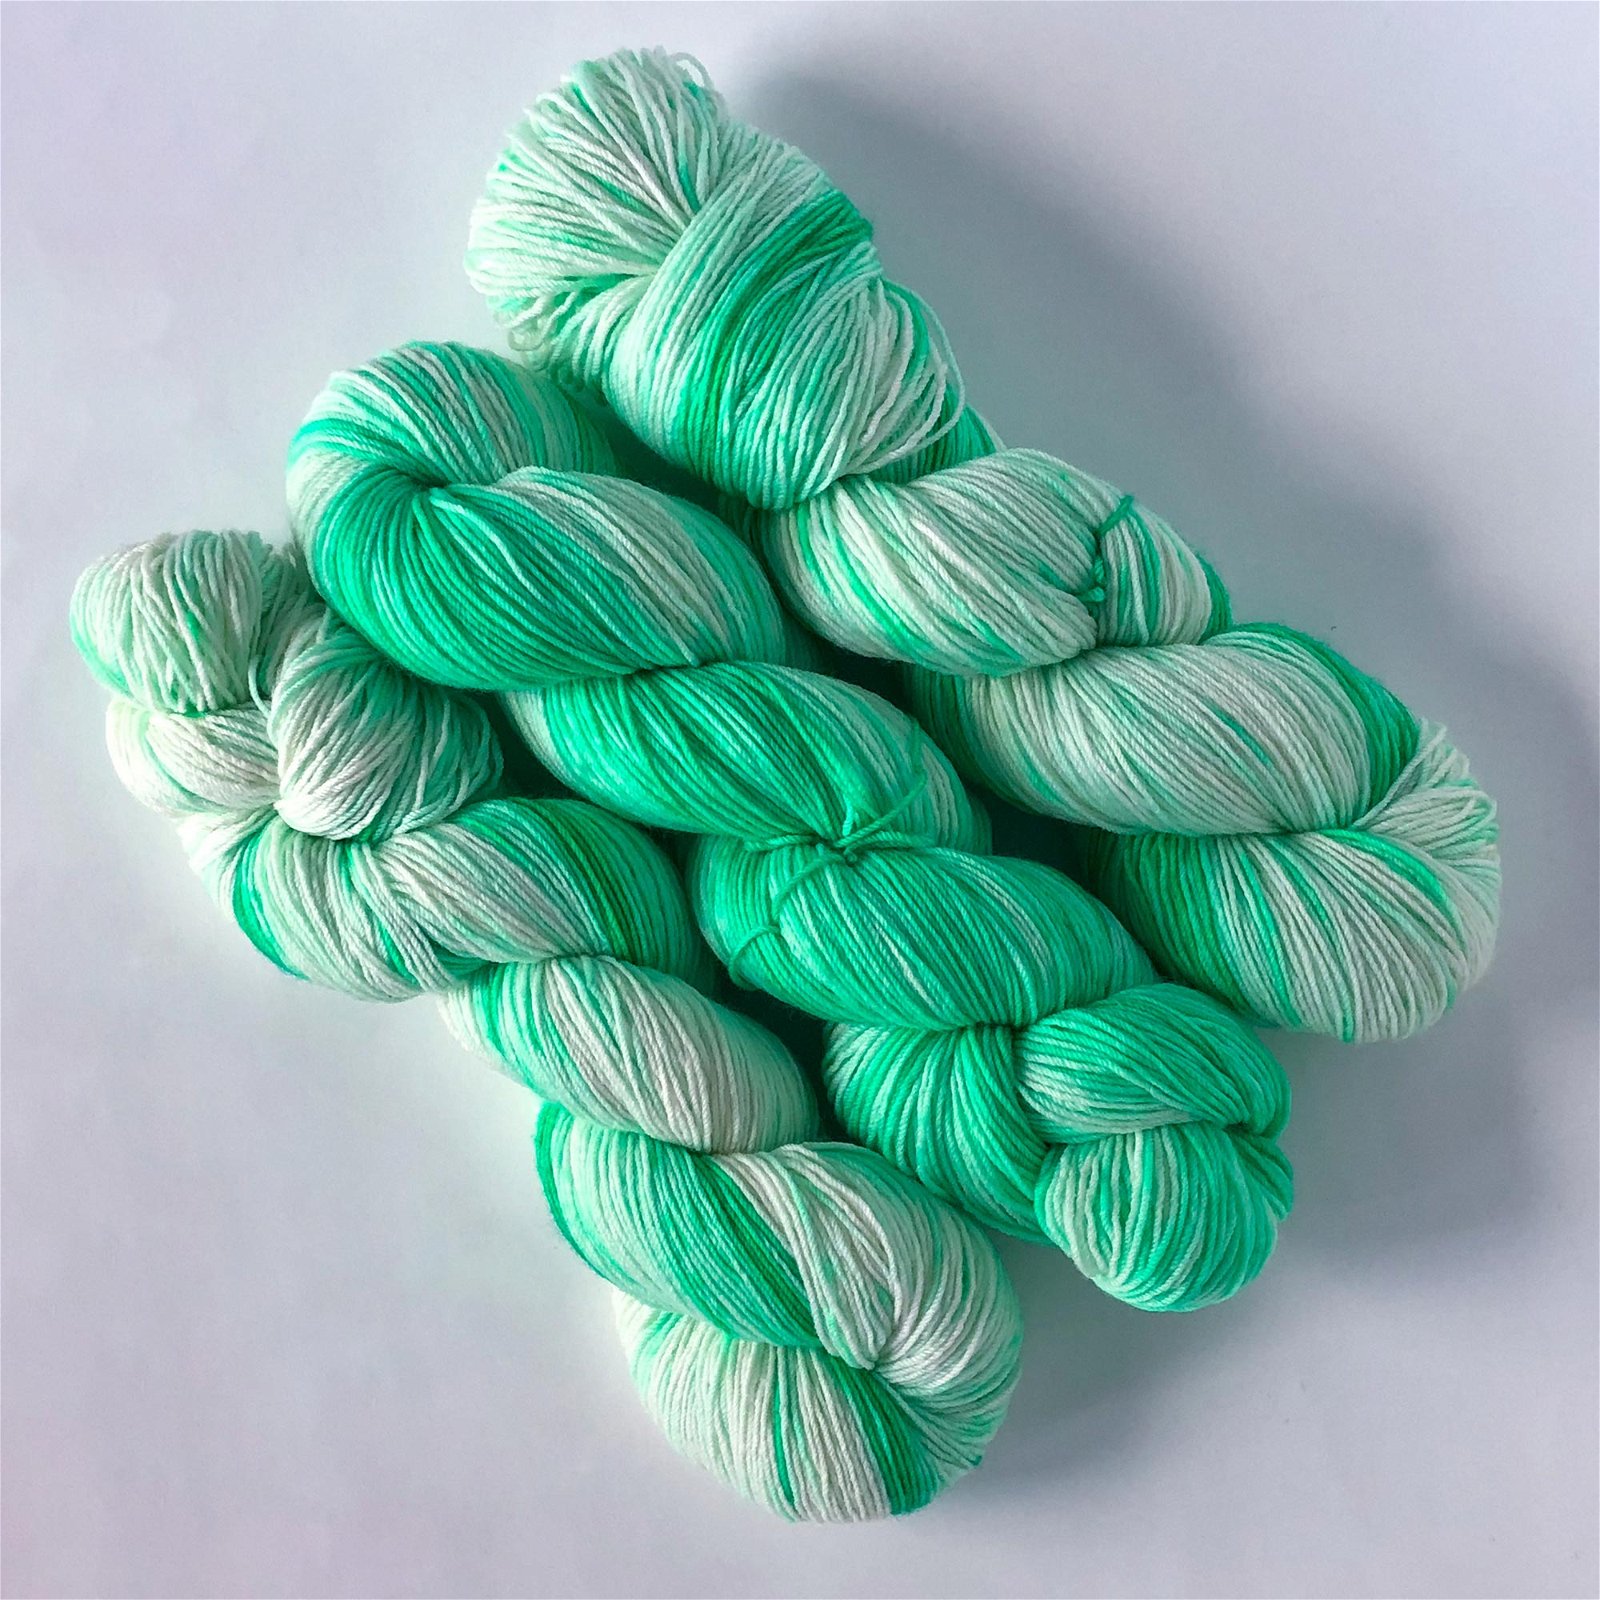 Lime 'n Coconut Sock Yarn in Green and White -- Hand Dyed Extrafine Merino Wool Blend